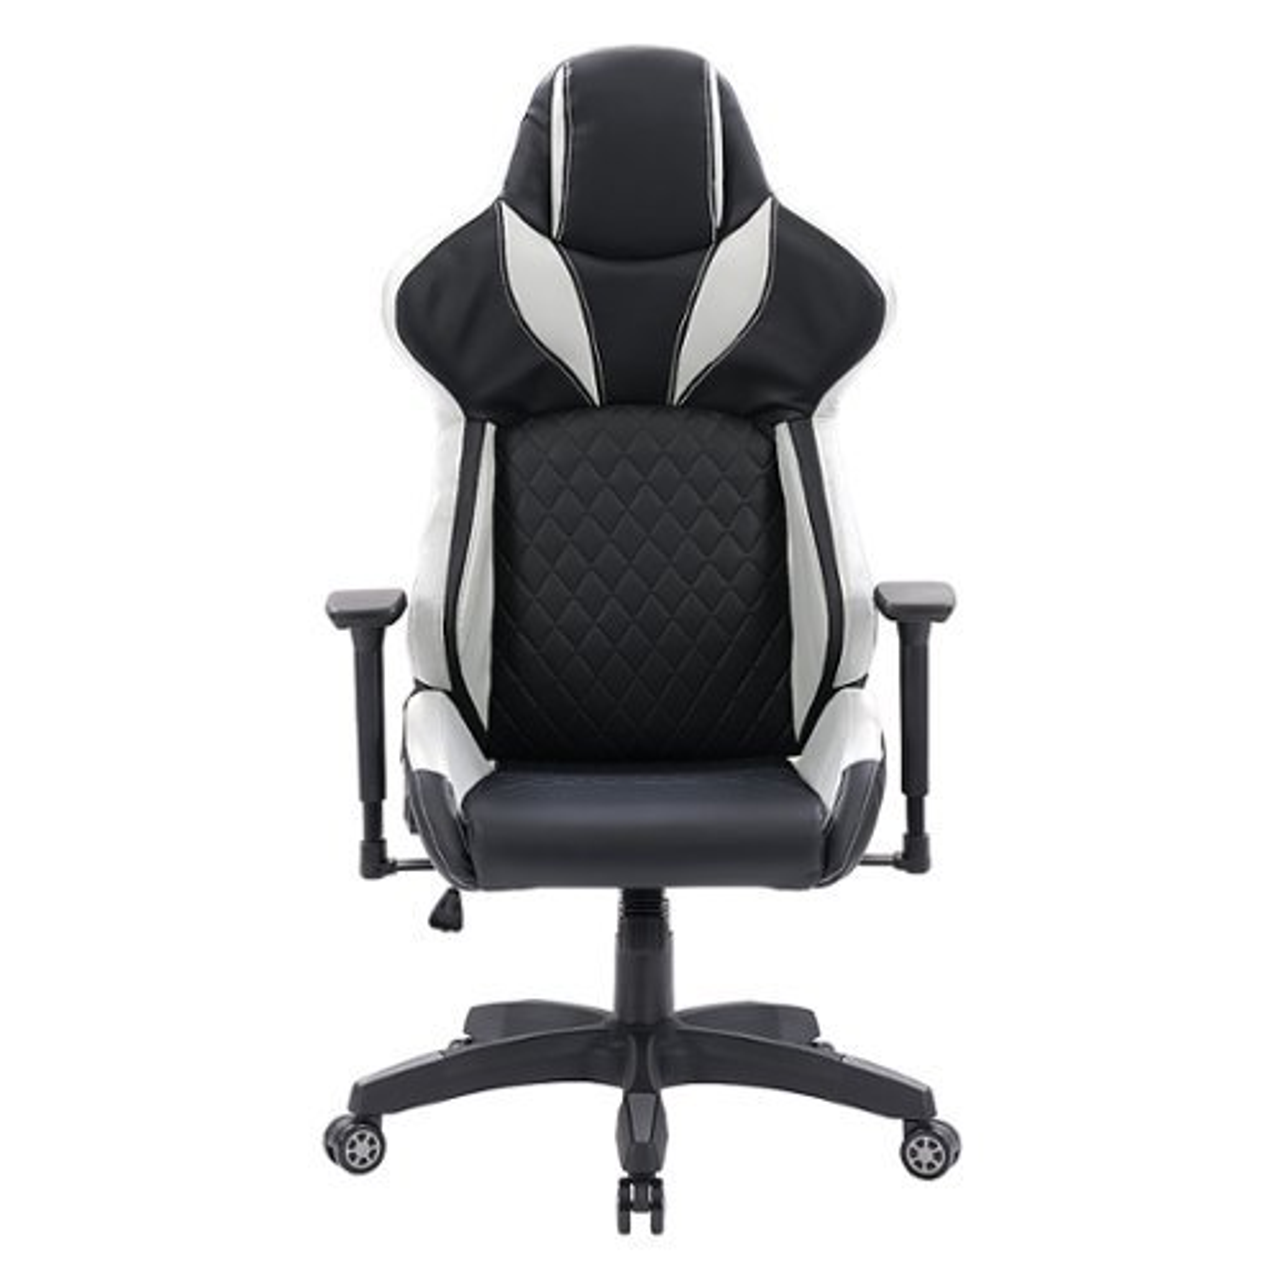 CorLiving Nightshade Gaming Chair - Black and White